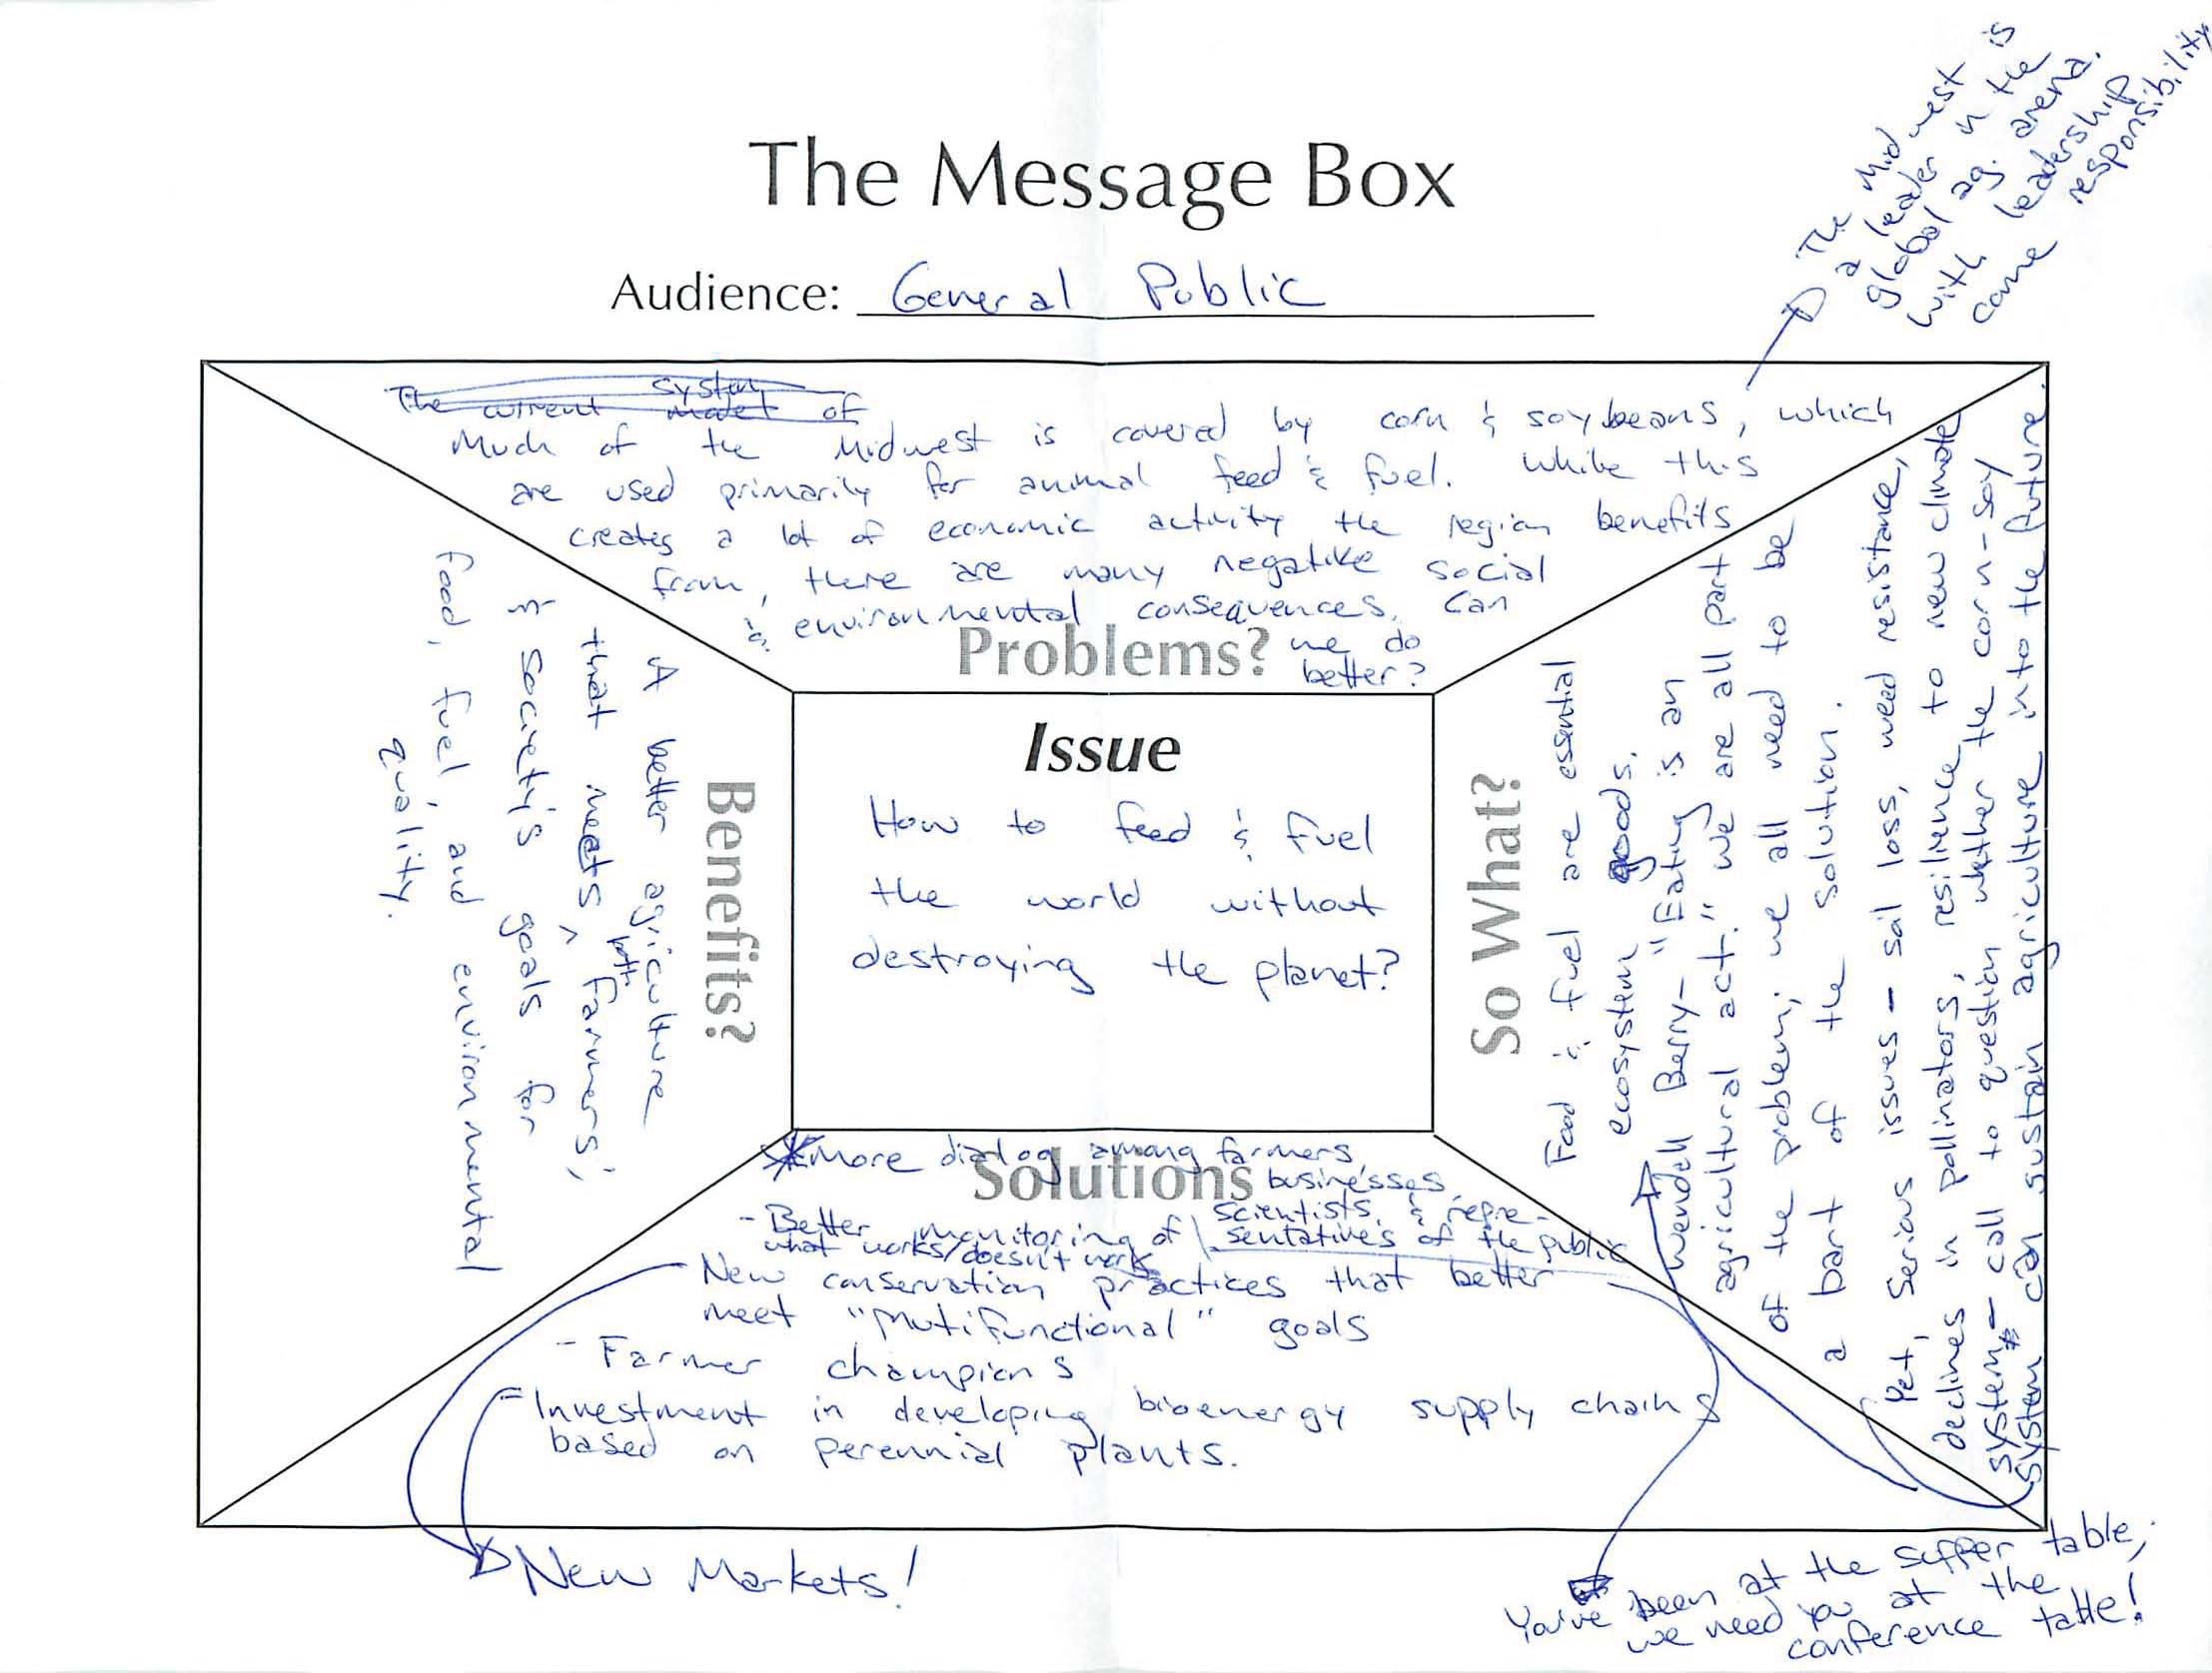 Lisa Schulte Moore's Leopold-style message box